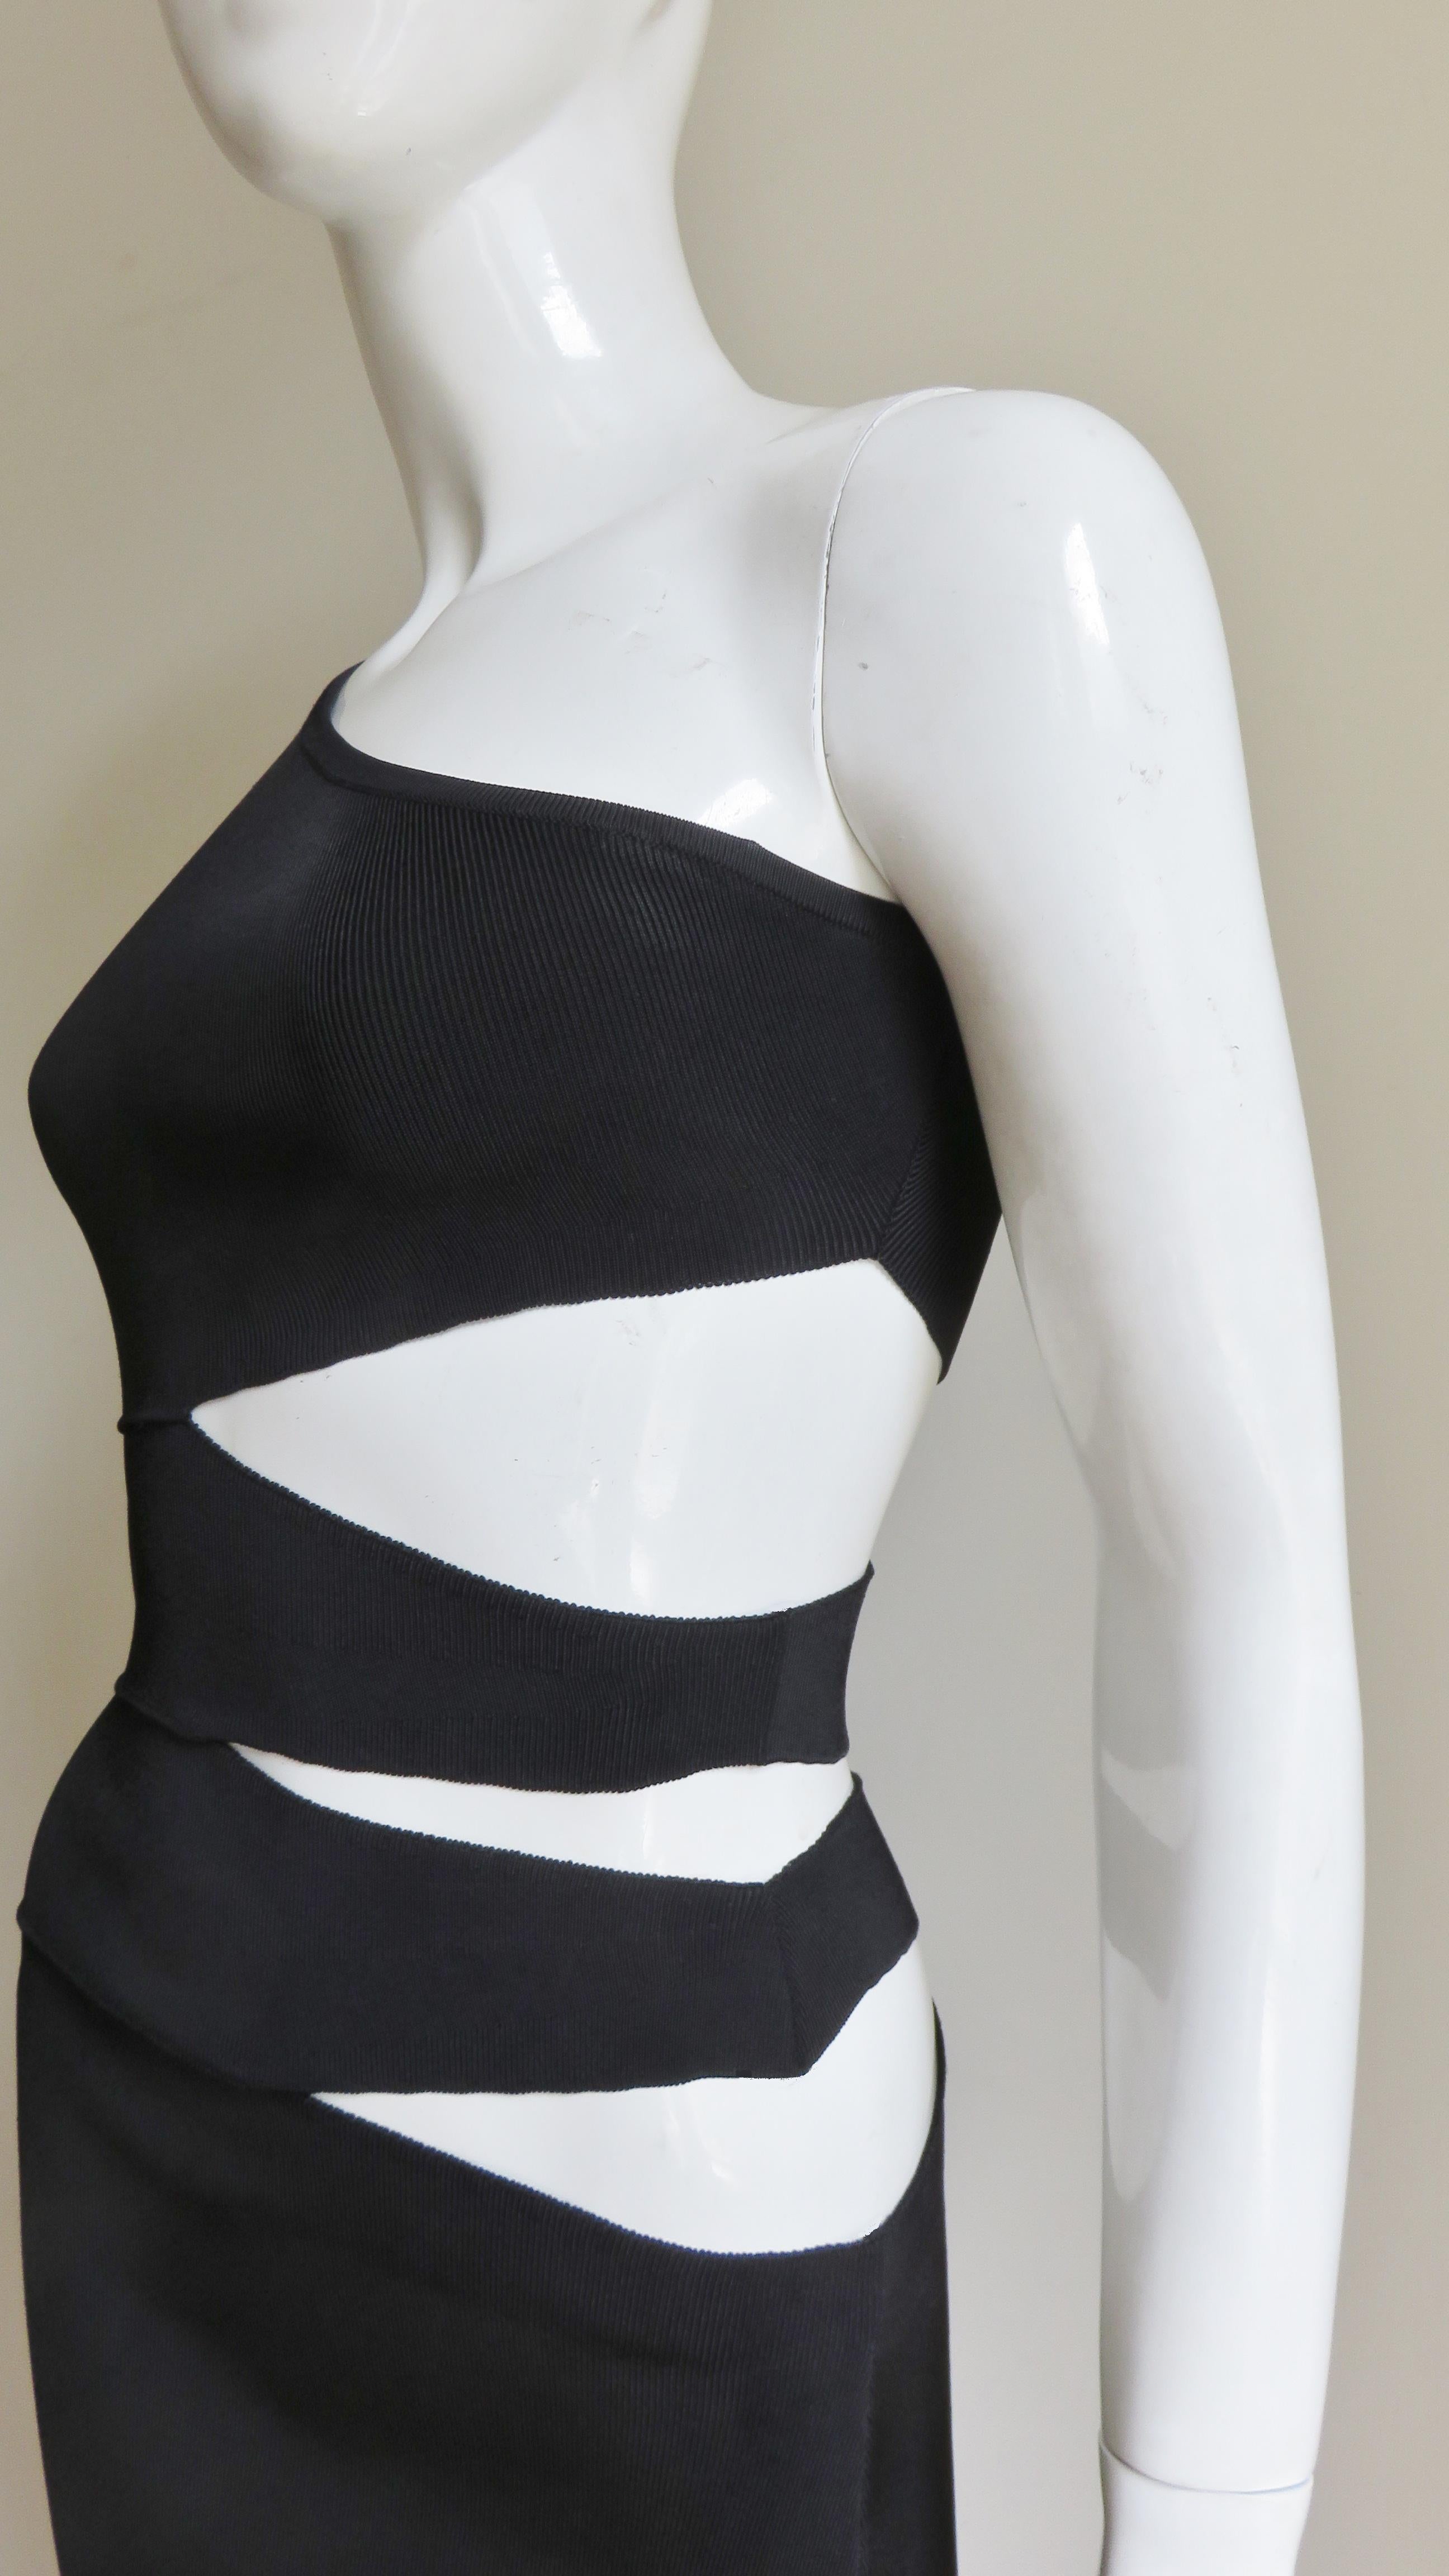 Pierre Balmain One Sleeve Dress with Side Cut outs In Excellent Condition For Sale In Water Mill, NY